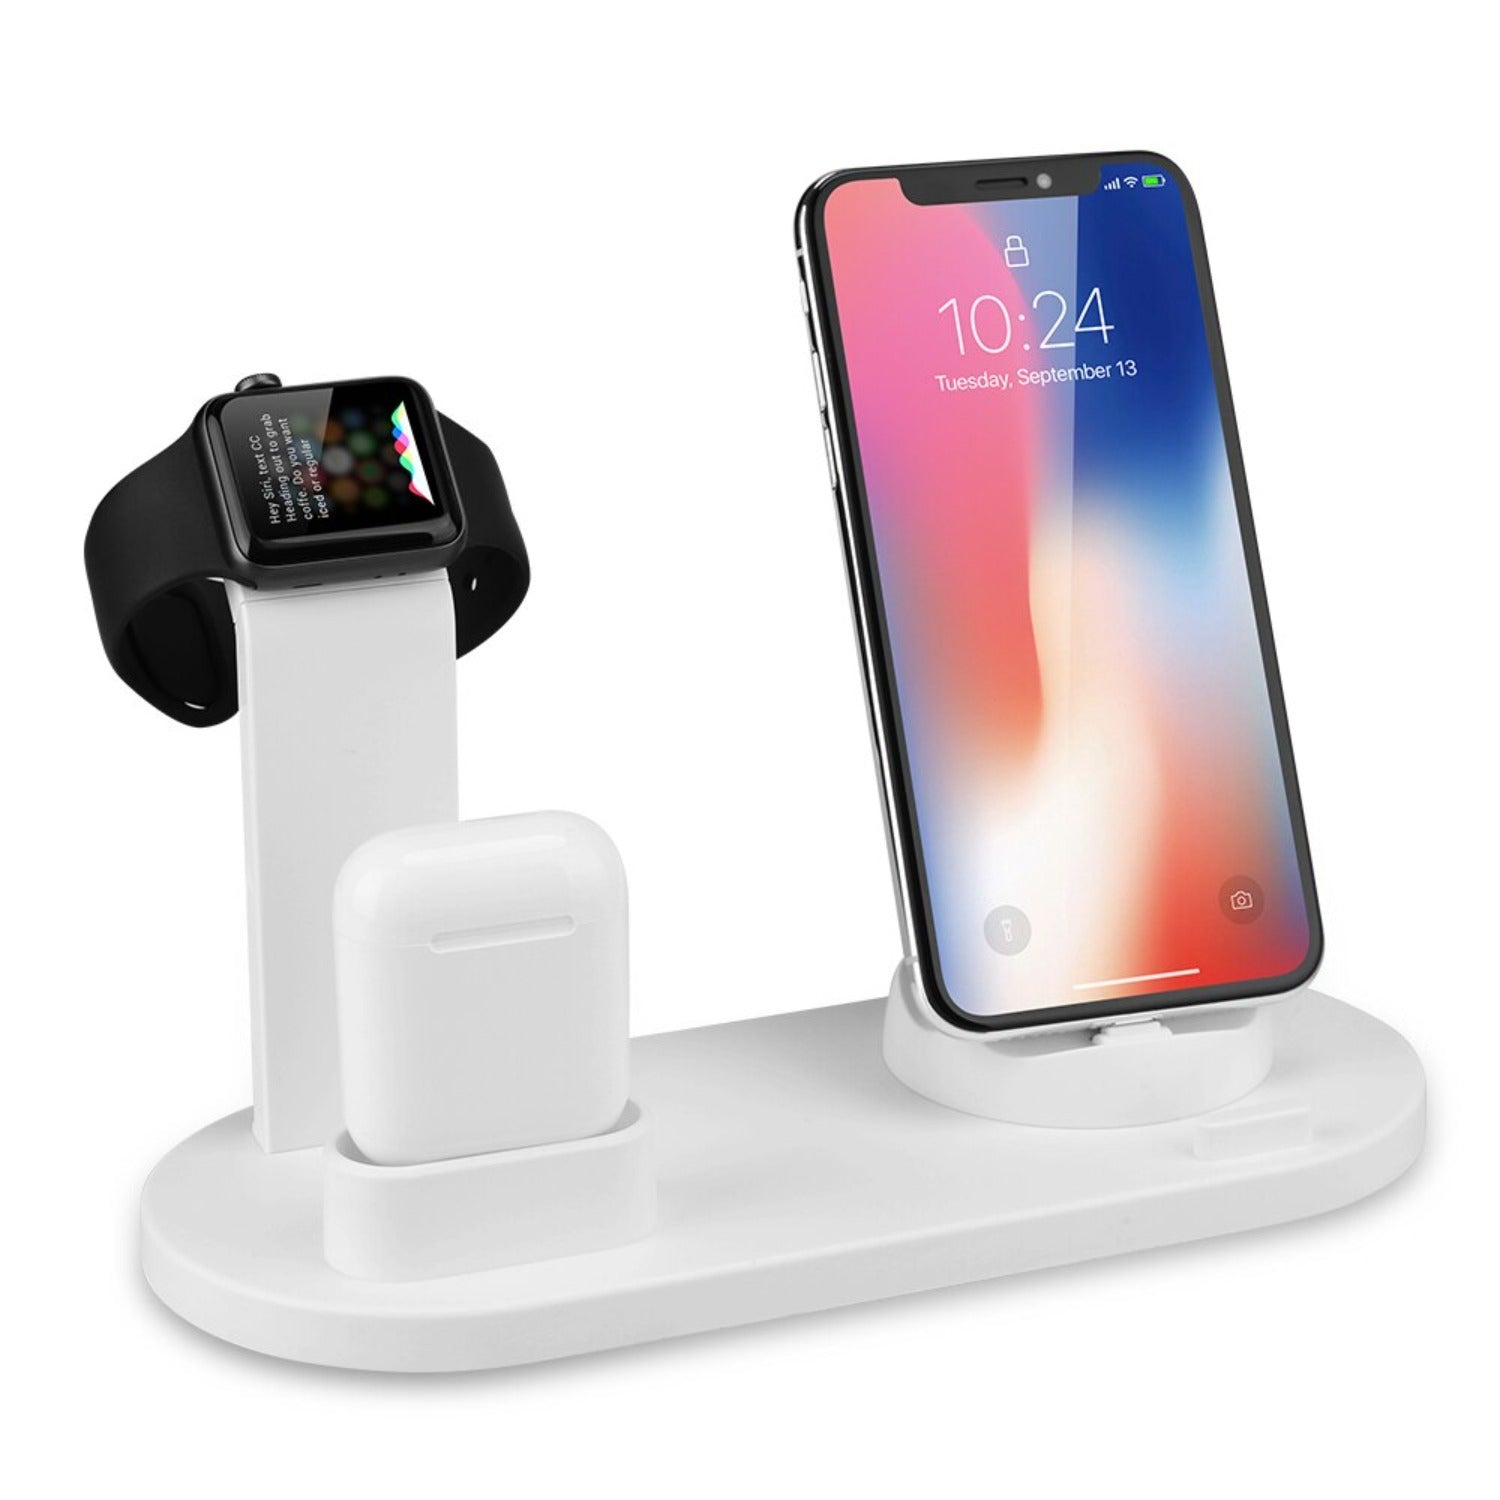 4-in-1 Multi Device Wireless Charging Dock Station for Apple iPhone, Samsung, Android, iWatch, Airpods, Google Pixel